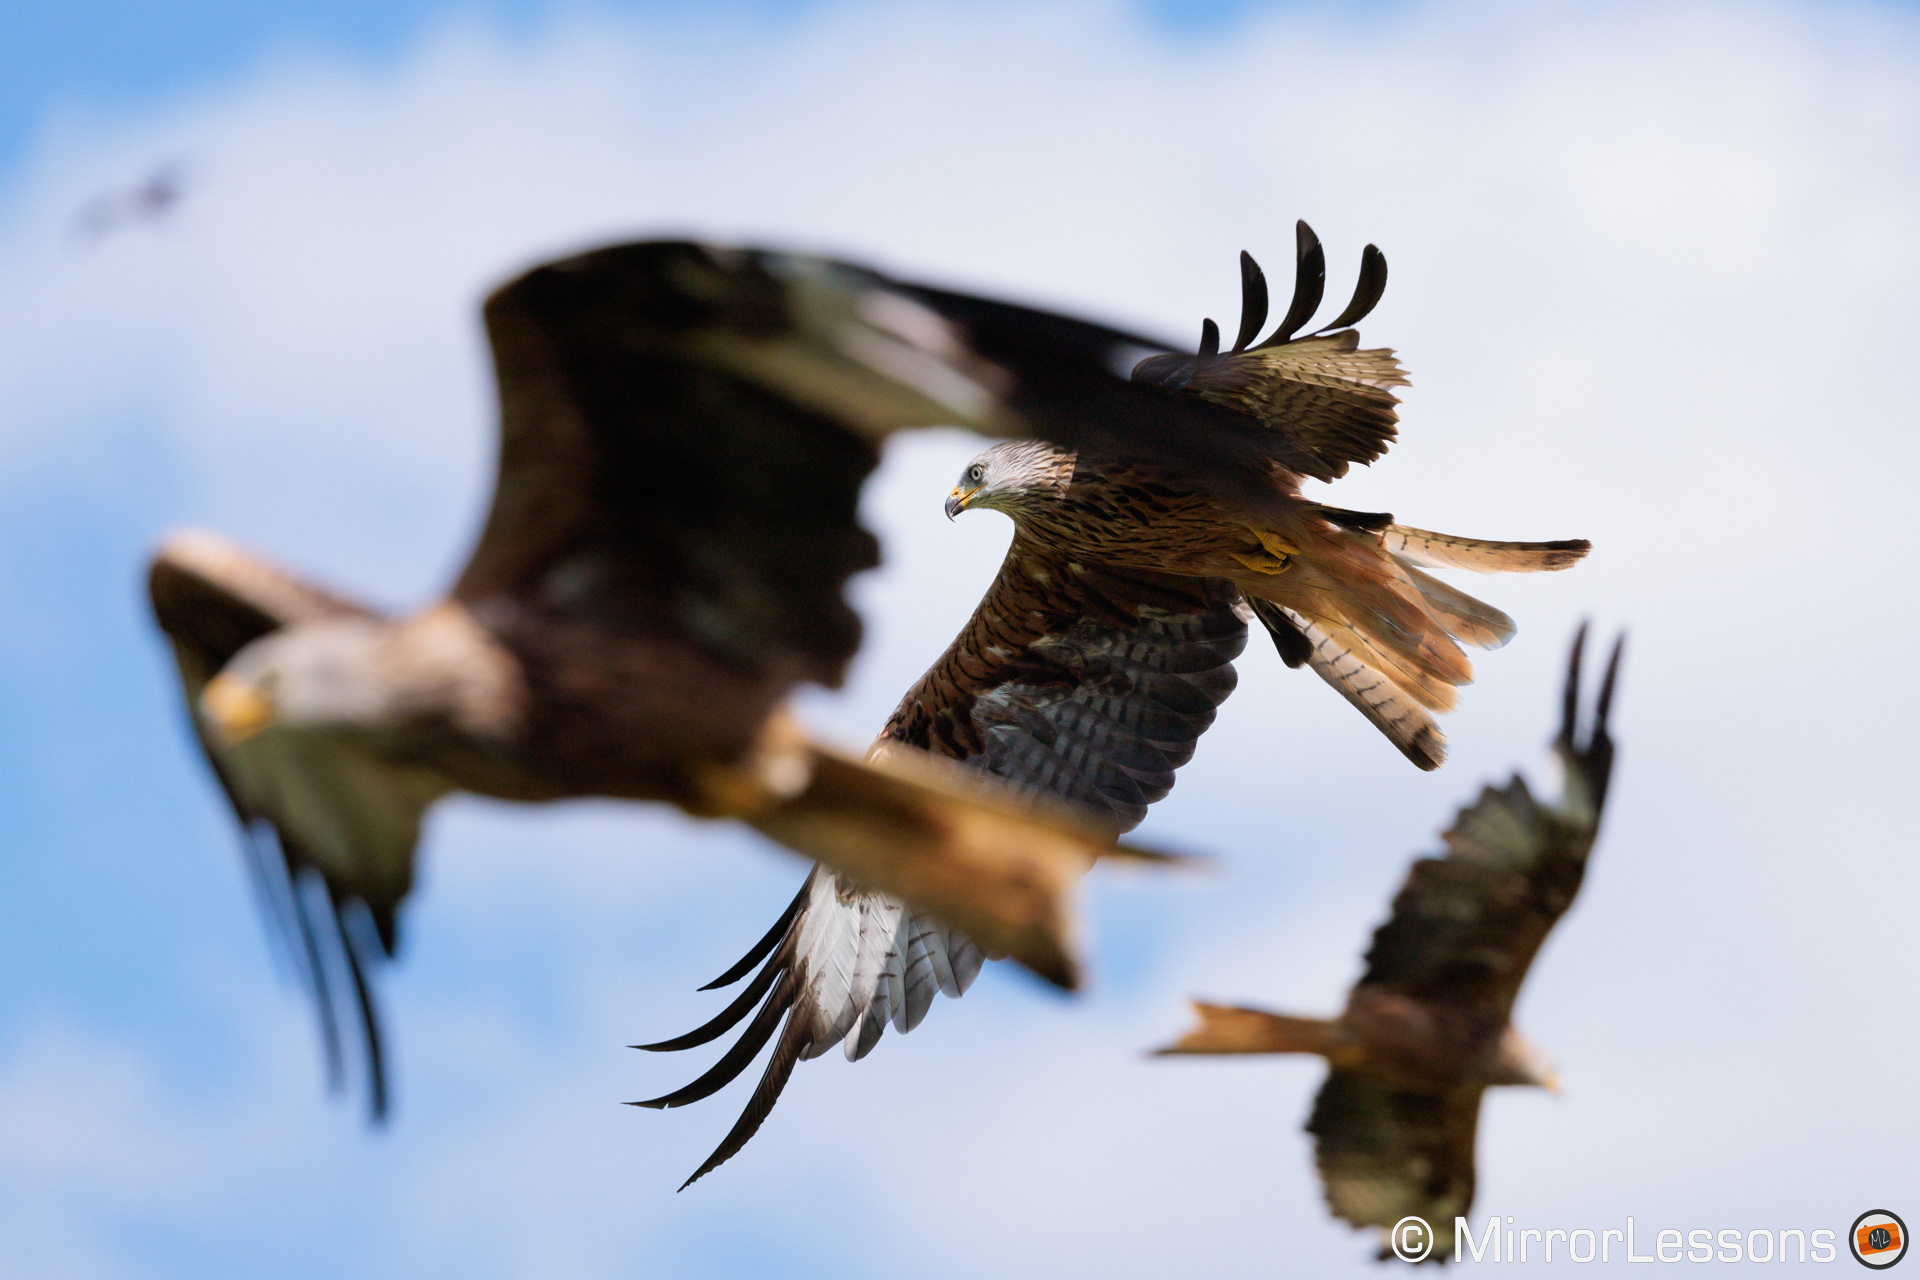 Red kite in focus at the centre, with other birds out of focus around him.